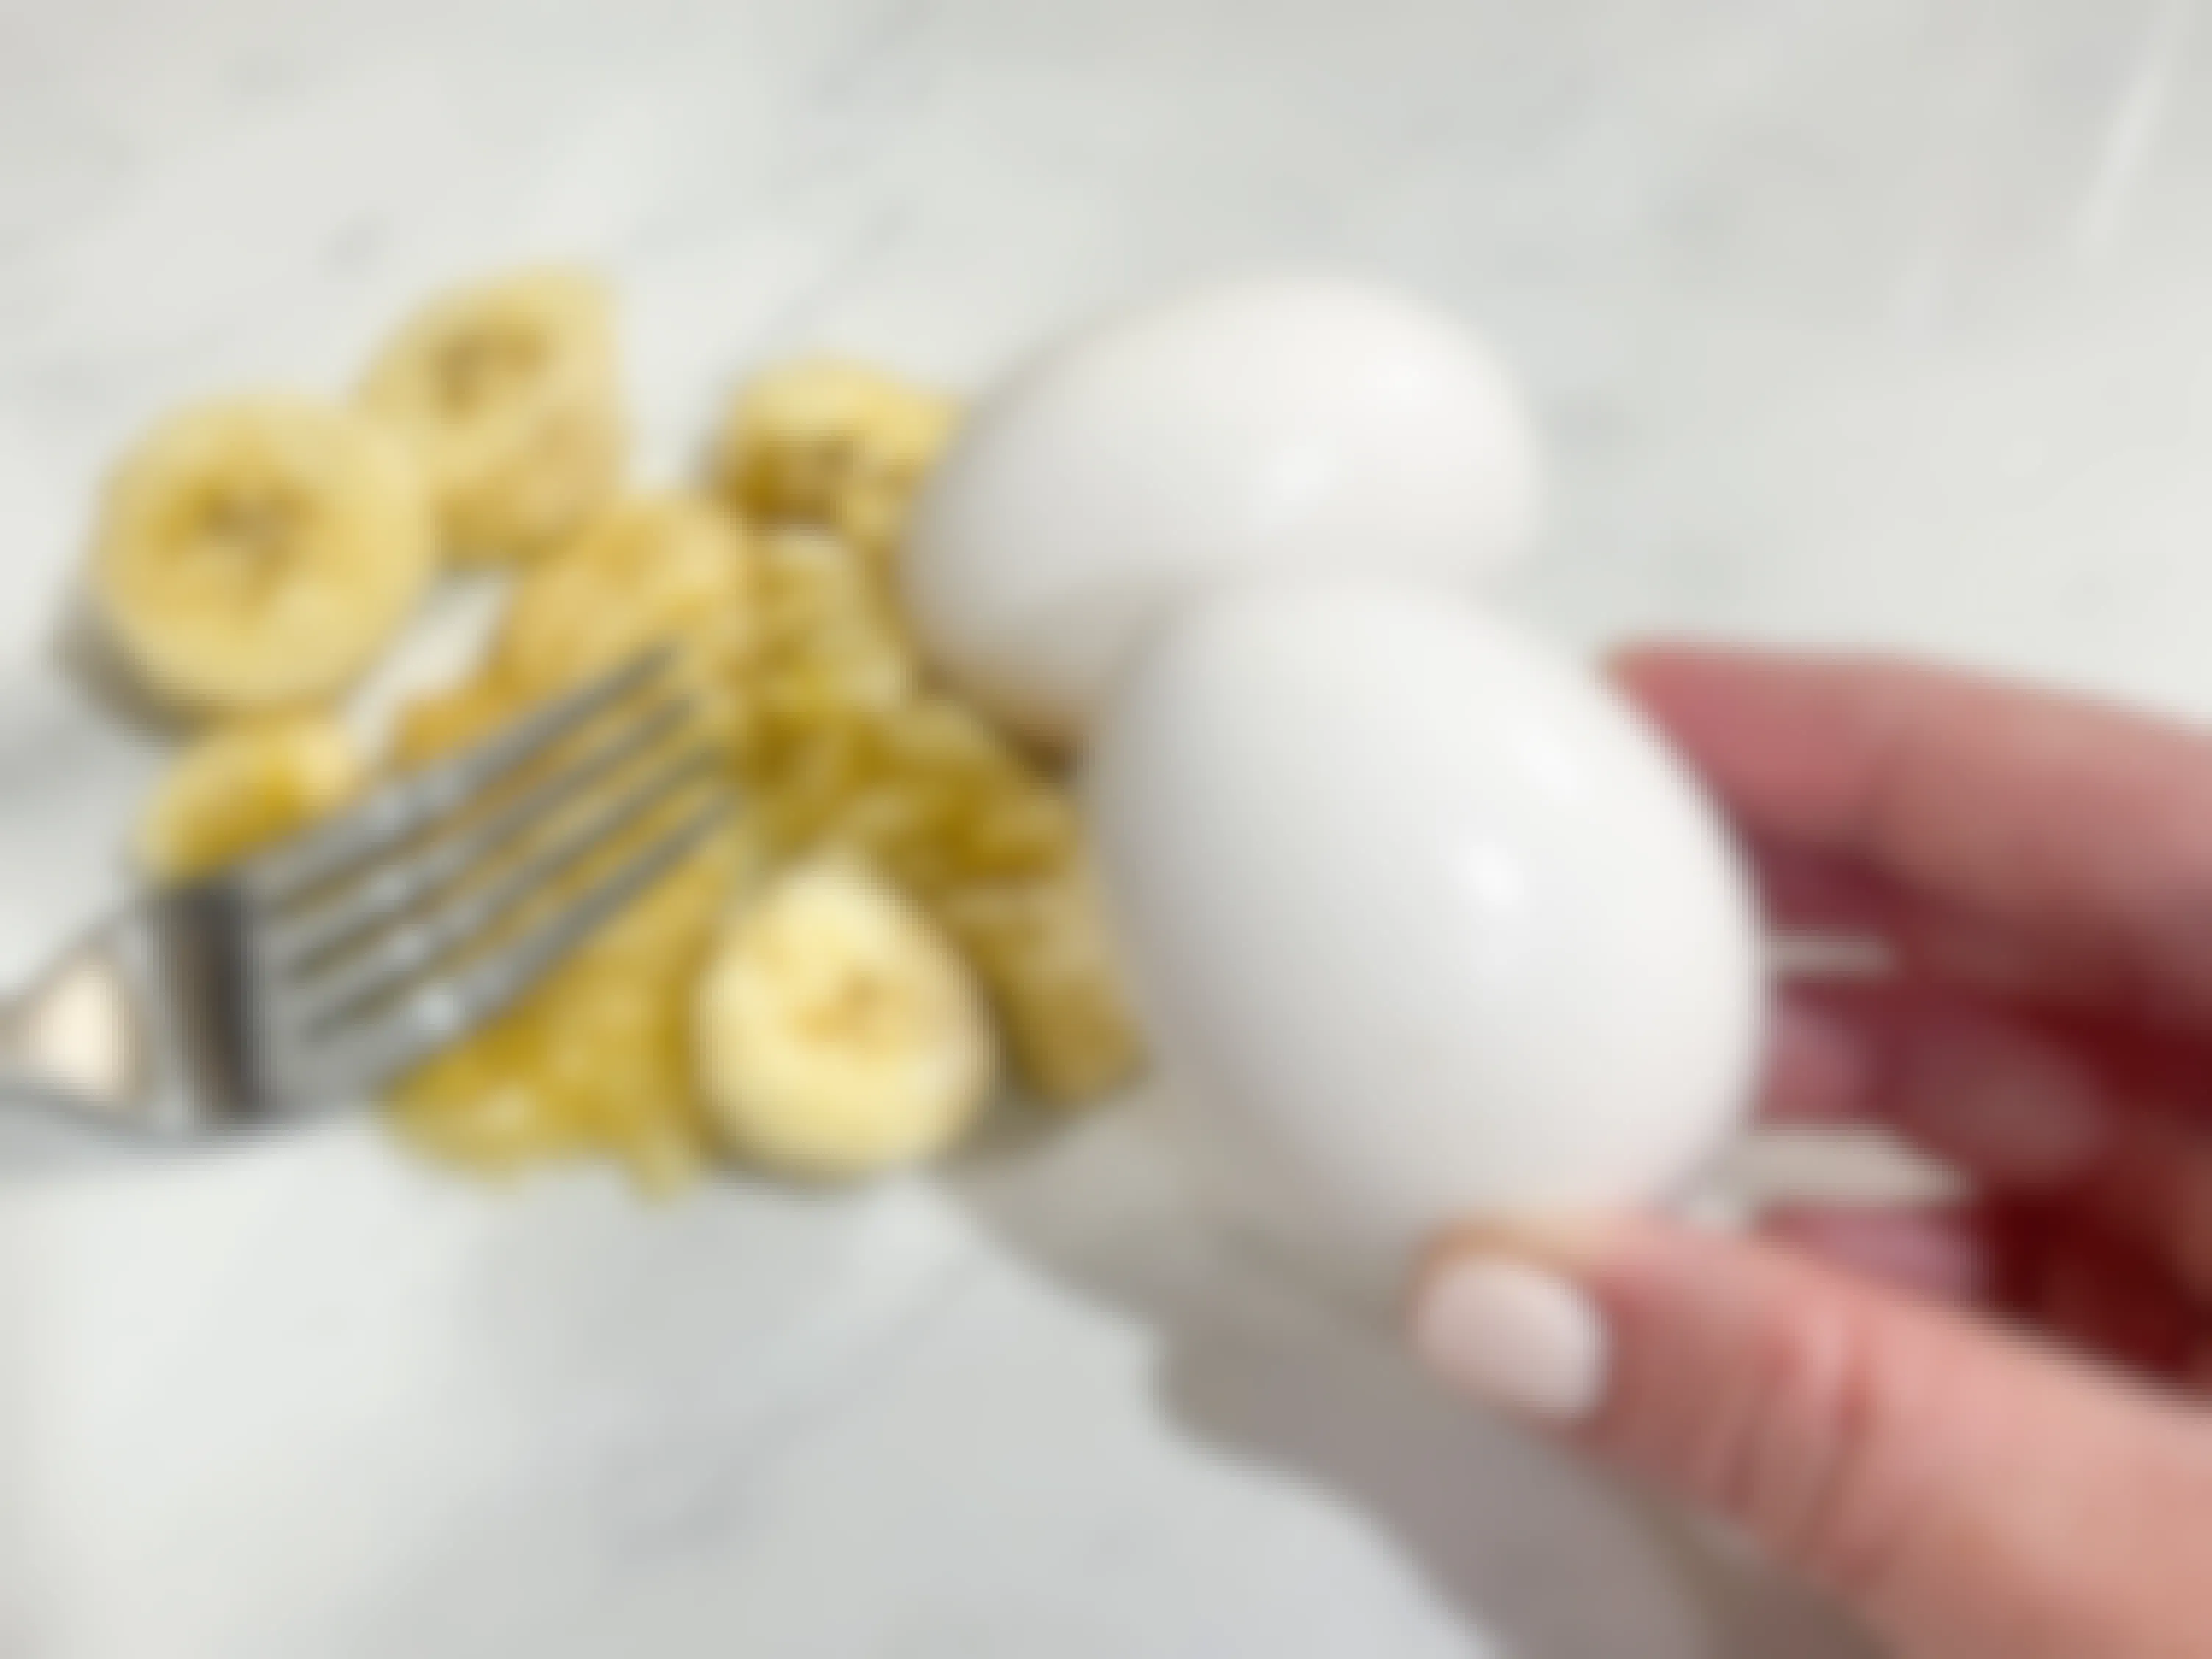 a person holding an egg in front of smashed bananas